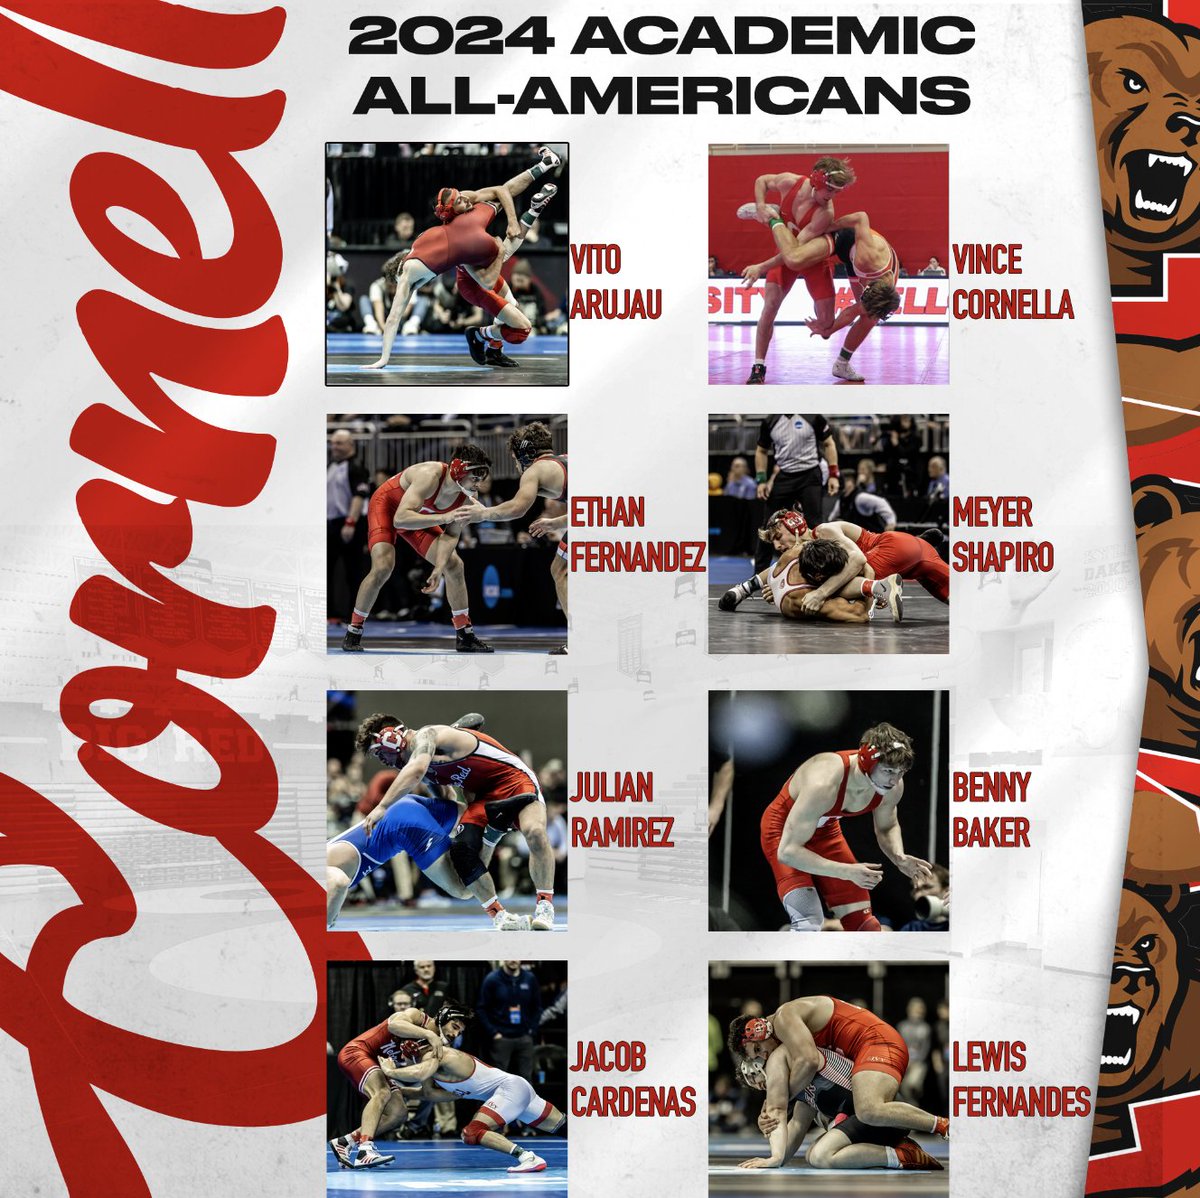 Proud to have 8️⃣ Scholar All-Americans! 📚🤼 #familynotfactory #yellcornell #gobigred